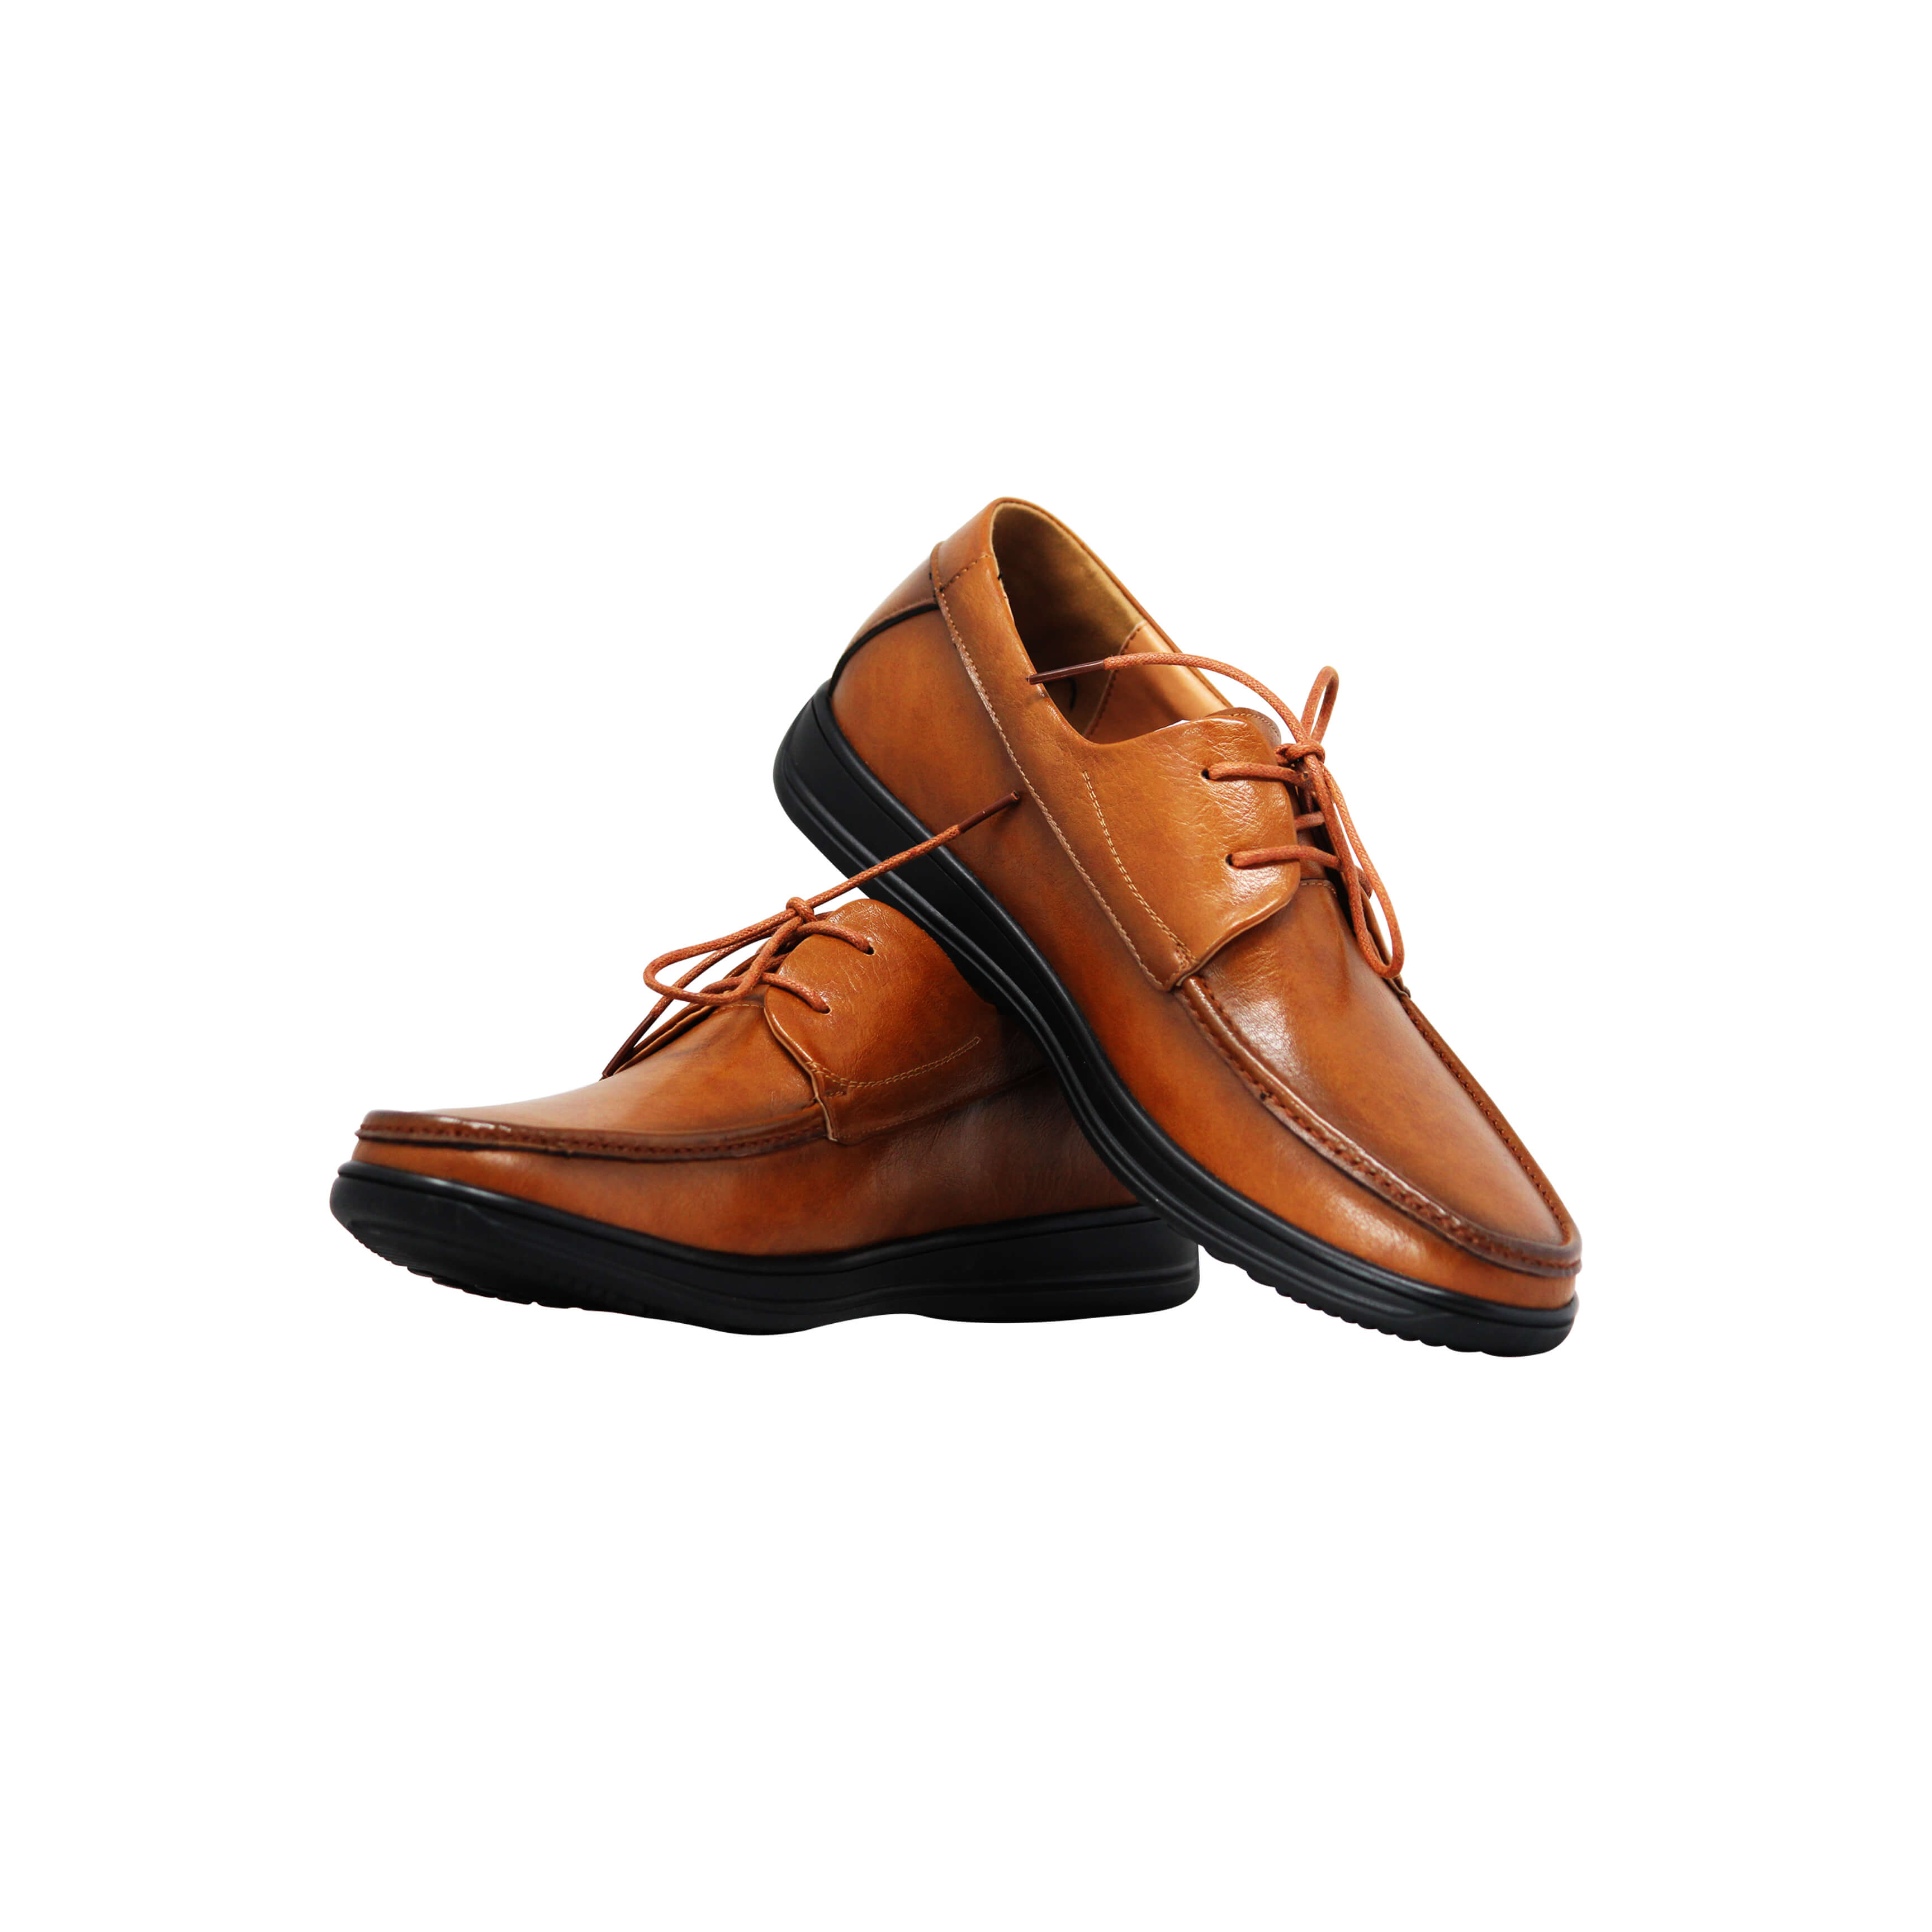 FORMAL COMFORT SHOES-BROWN - LIFESTYLE INTERNATIONAL